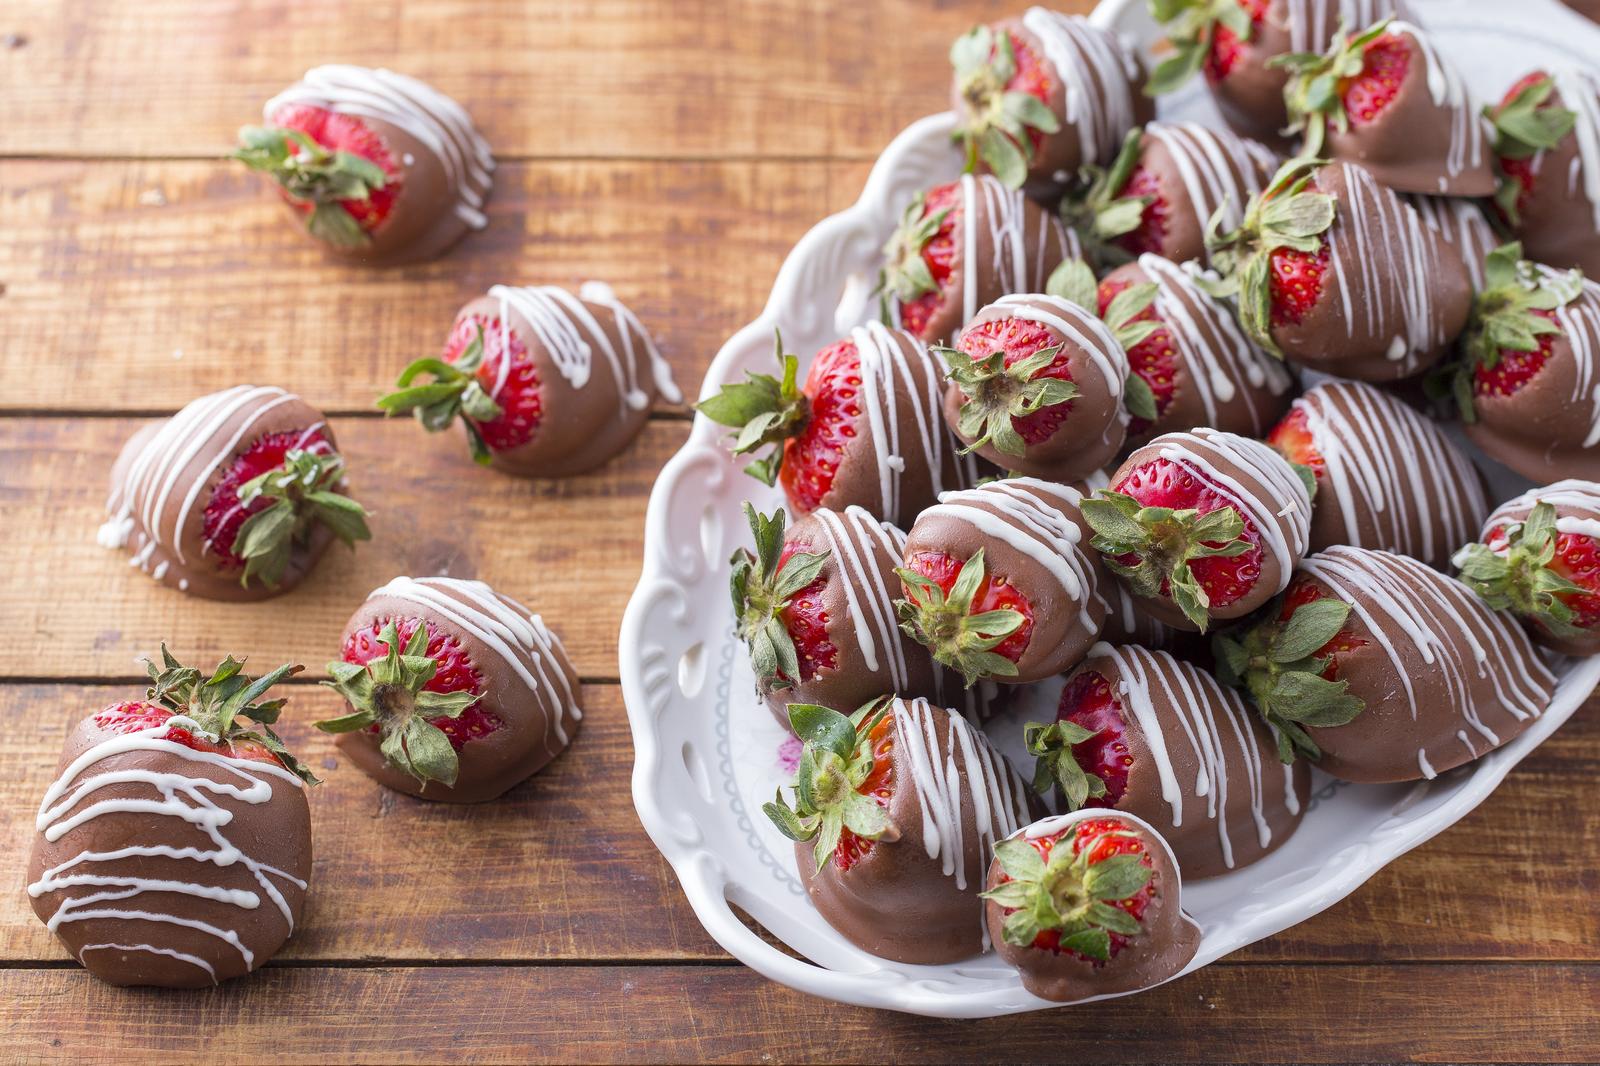 Play This Comfort Food “Would You Rather” to Find Out What State You’re Perfectly Suited for Chocolate Covered Strawberries